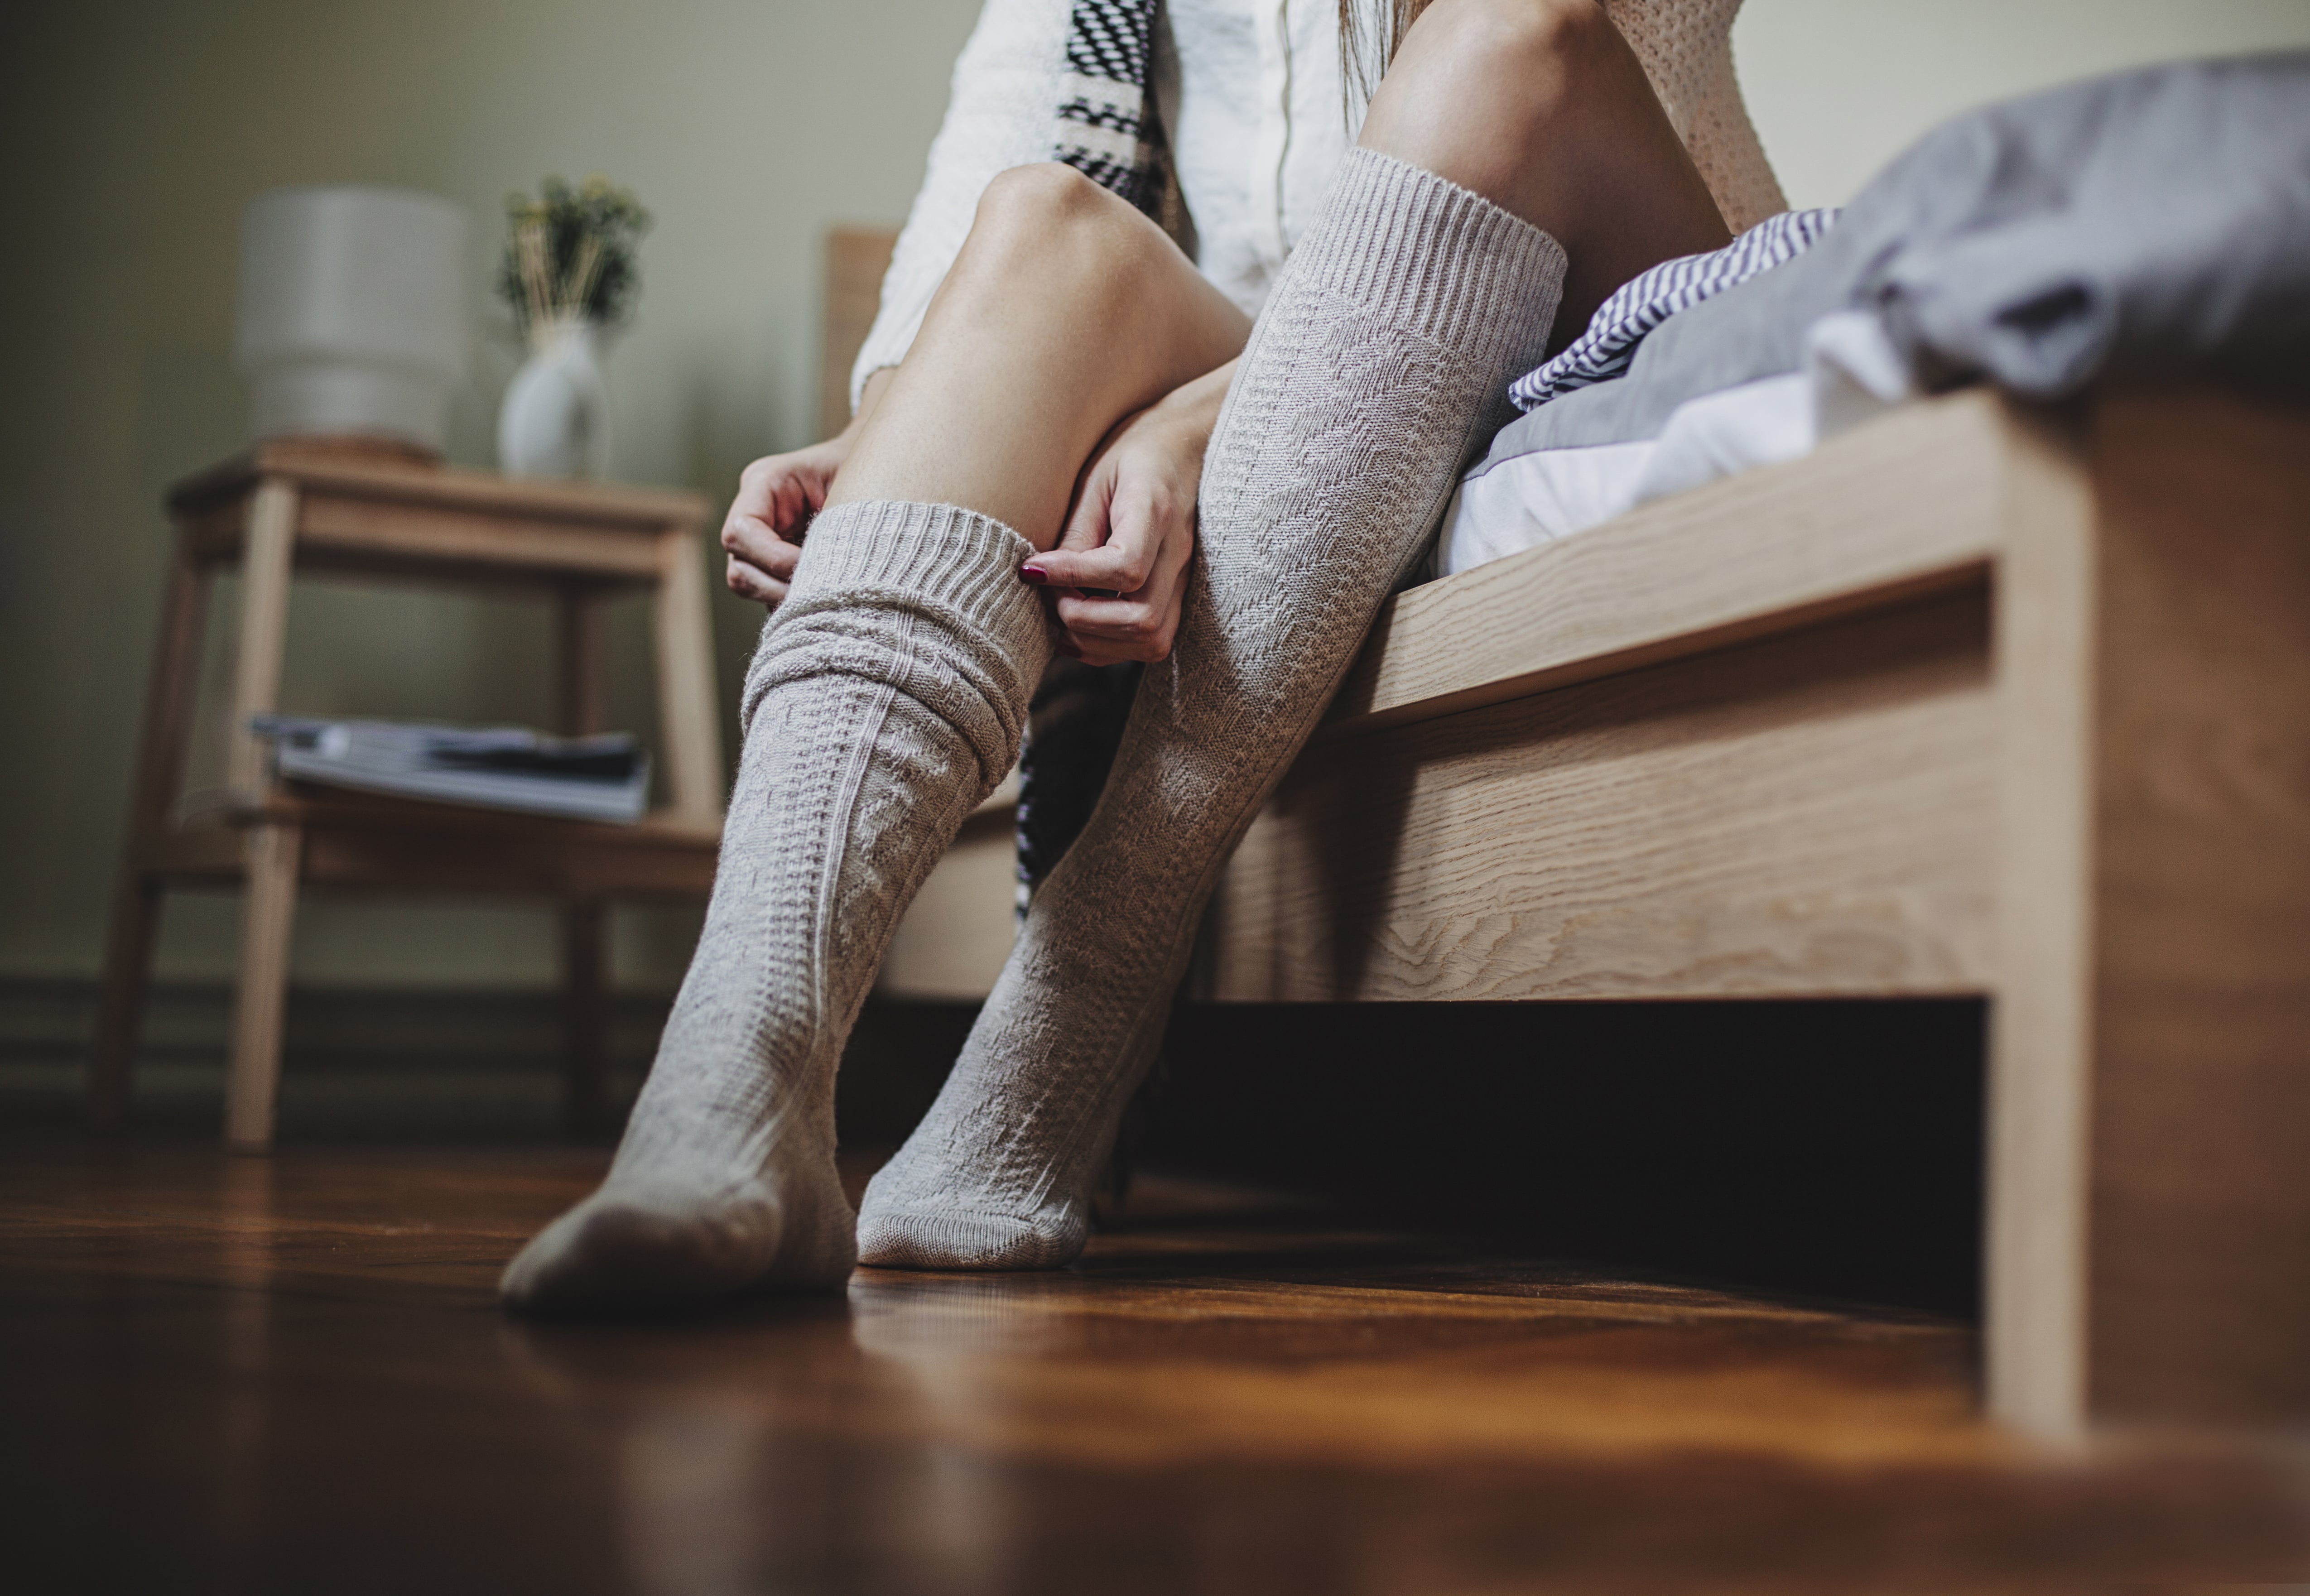 Is it Safe to Wear Compression Socks to Bed at Night?